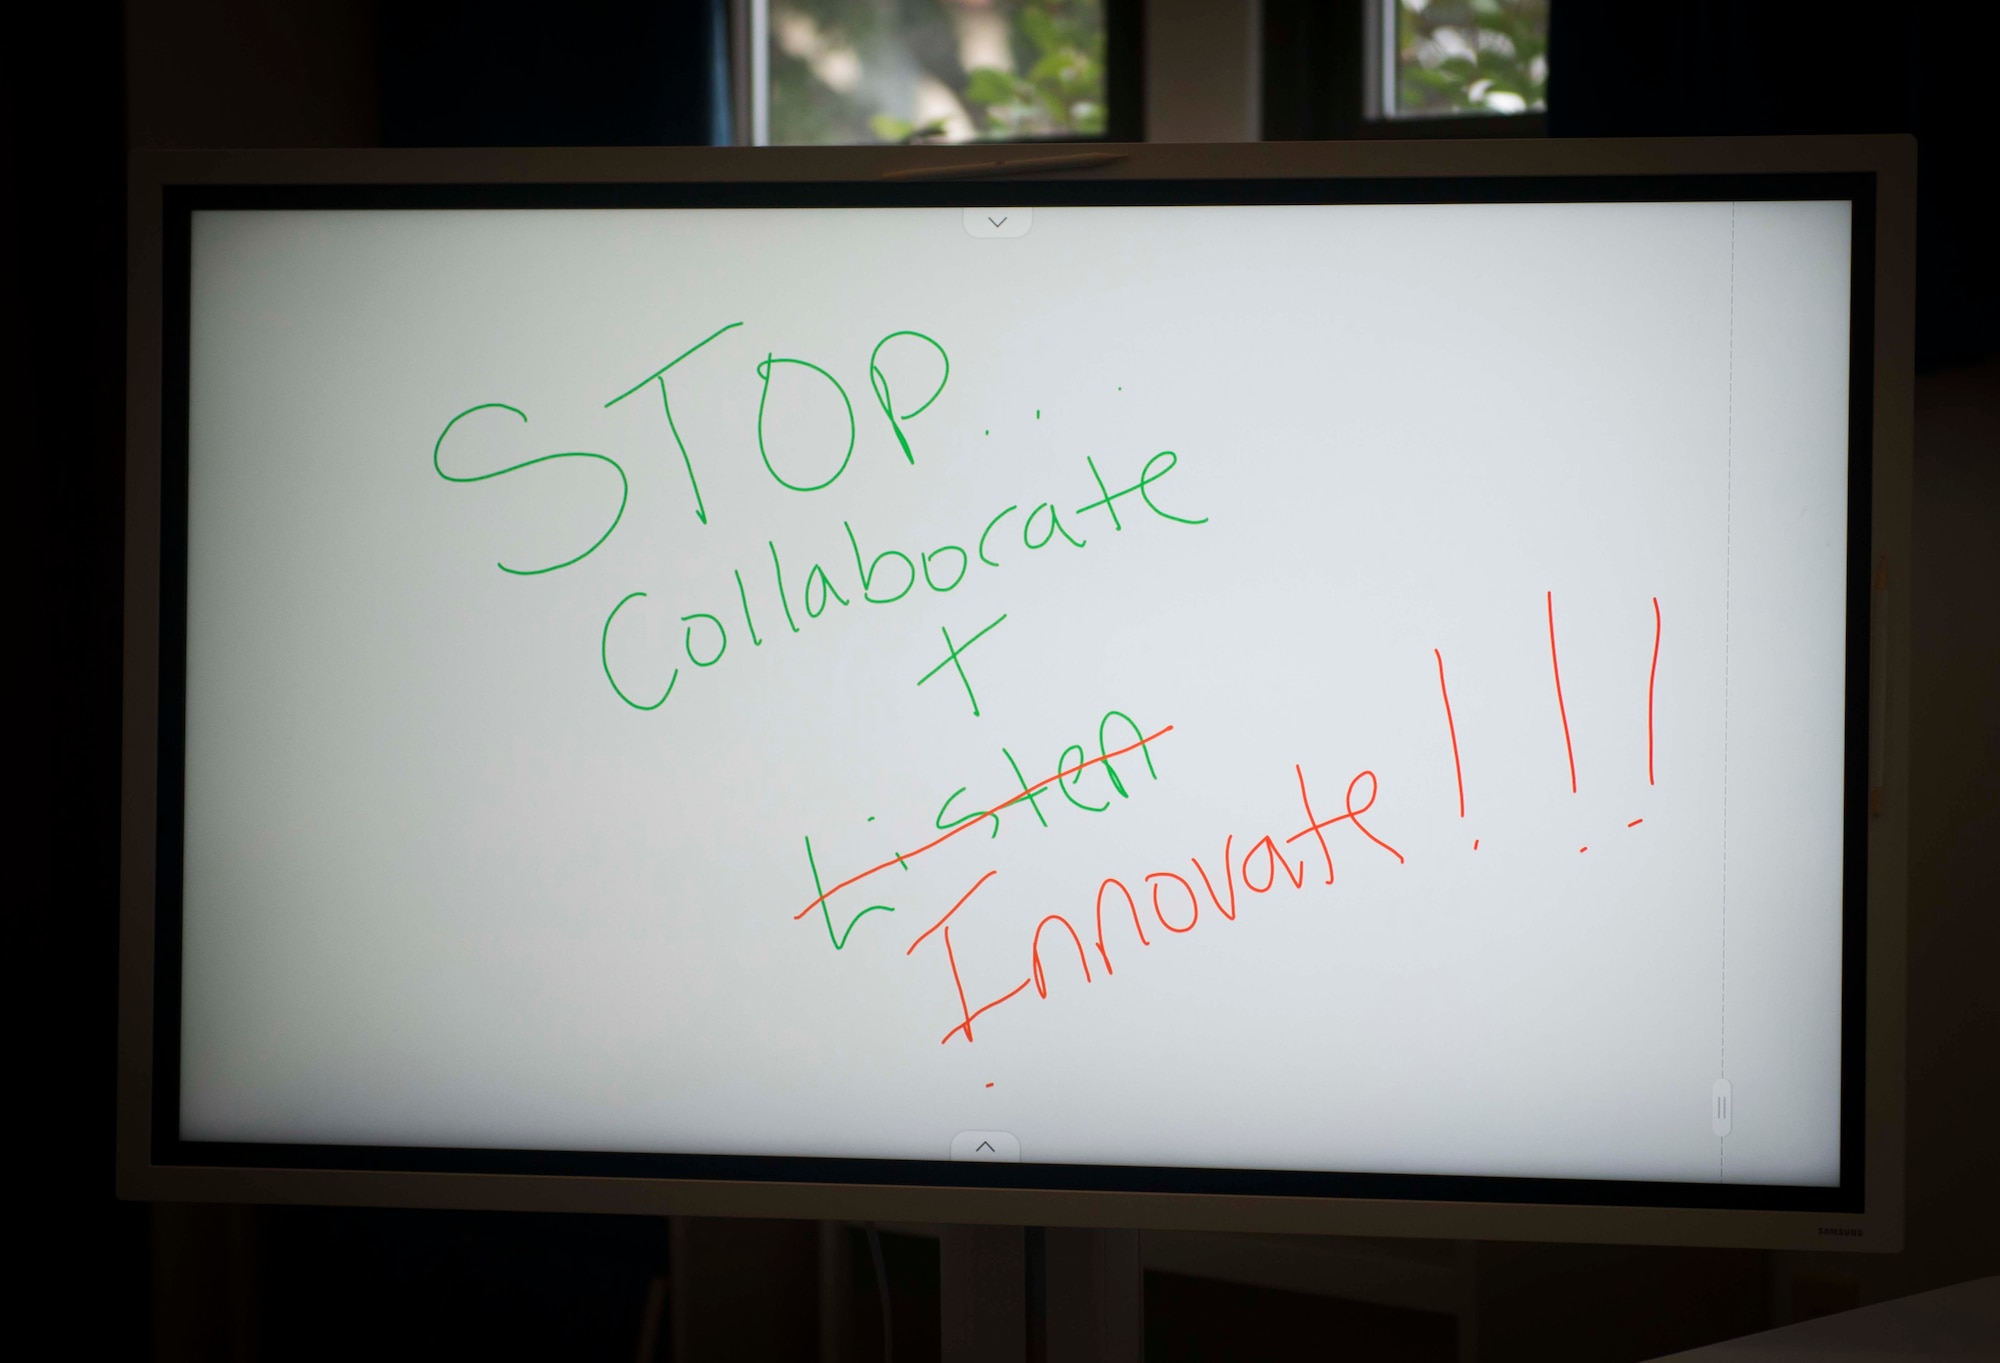 Photograph of a sign that reads, “Stop, collaborate and innovate” at AFPC’s inaugural Innovation Symposium